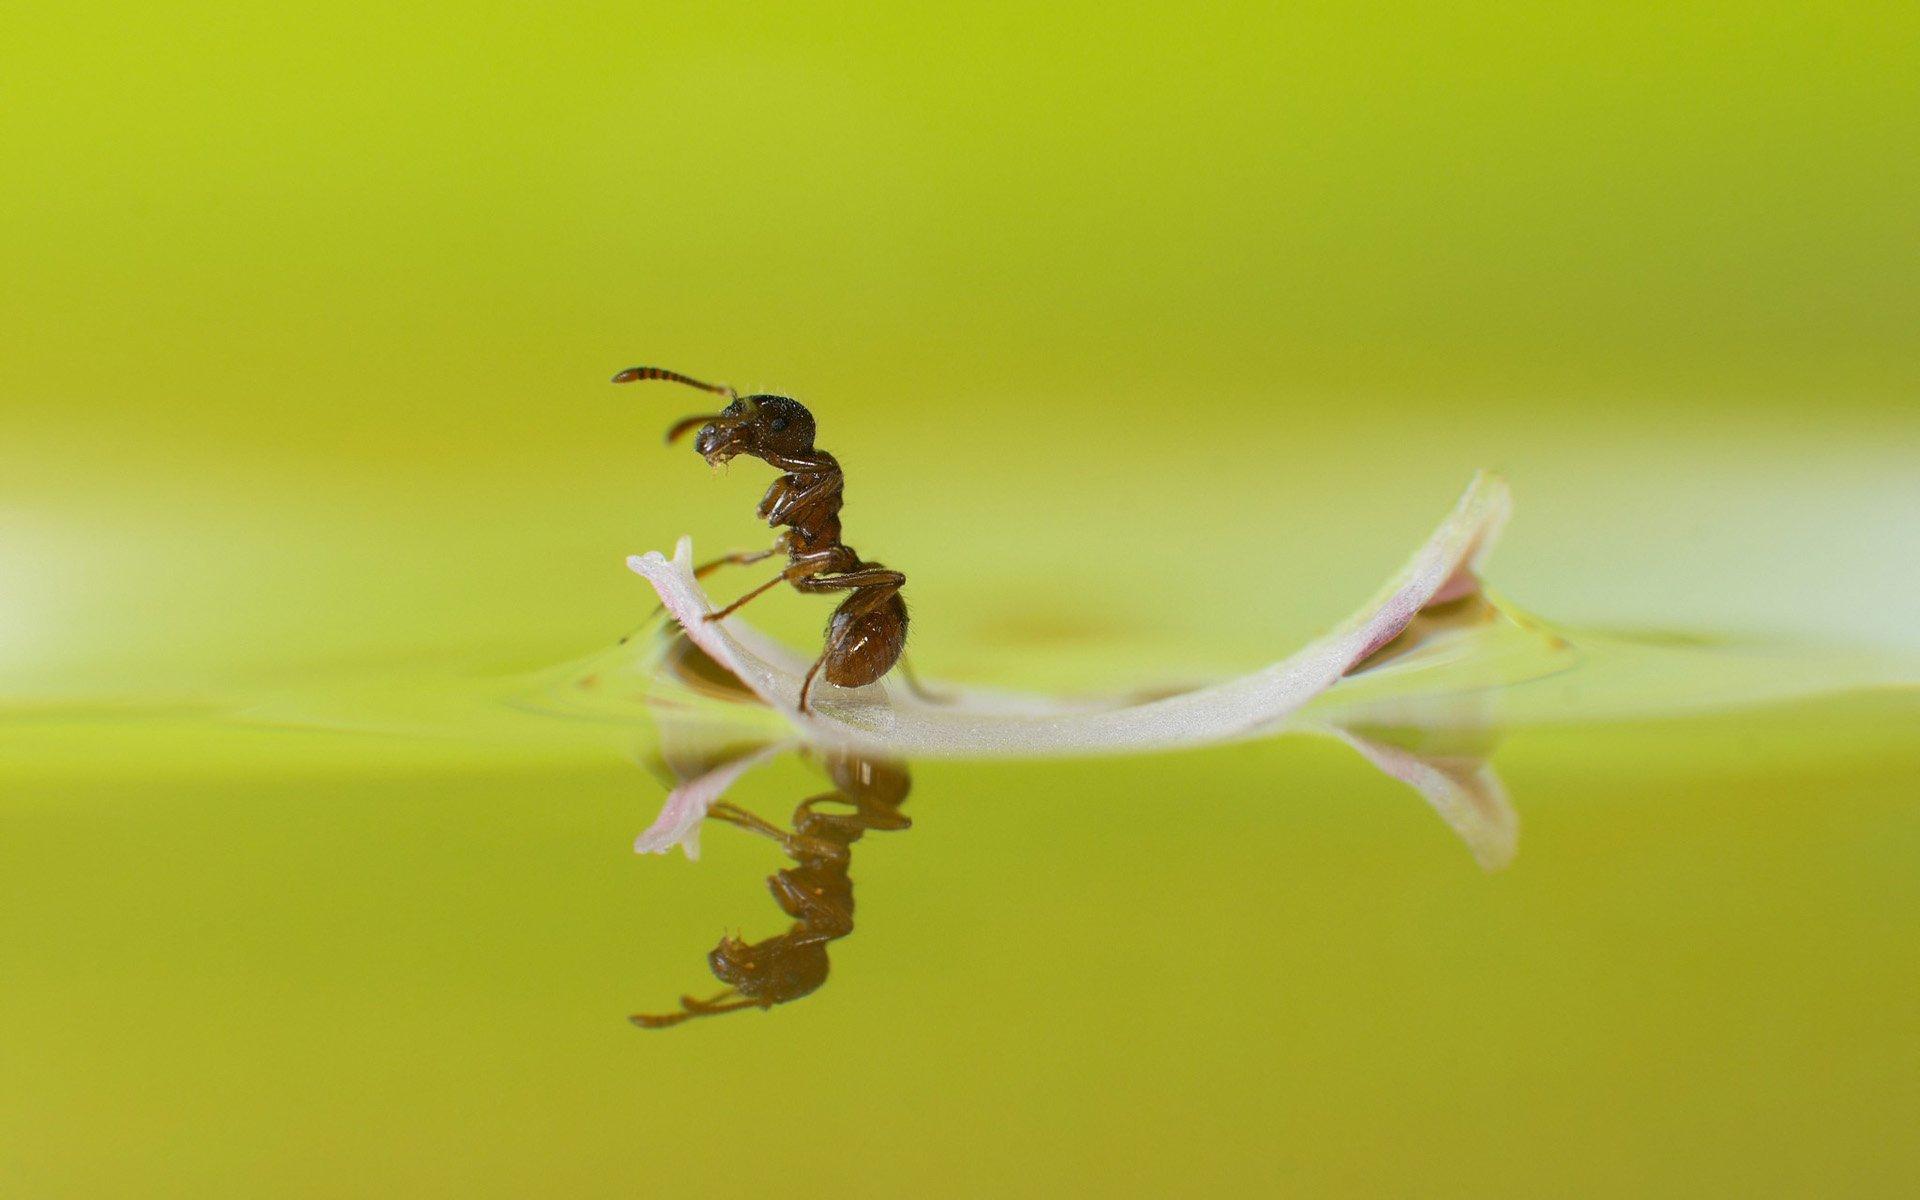 Ant HD Wallpaper and Background Image